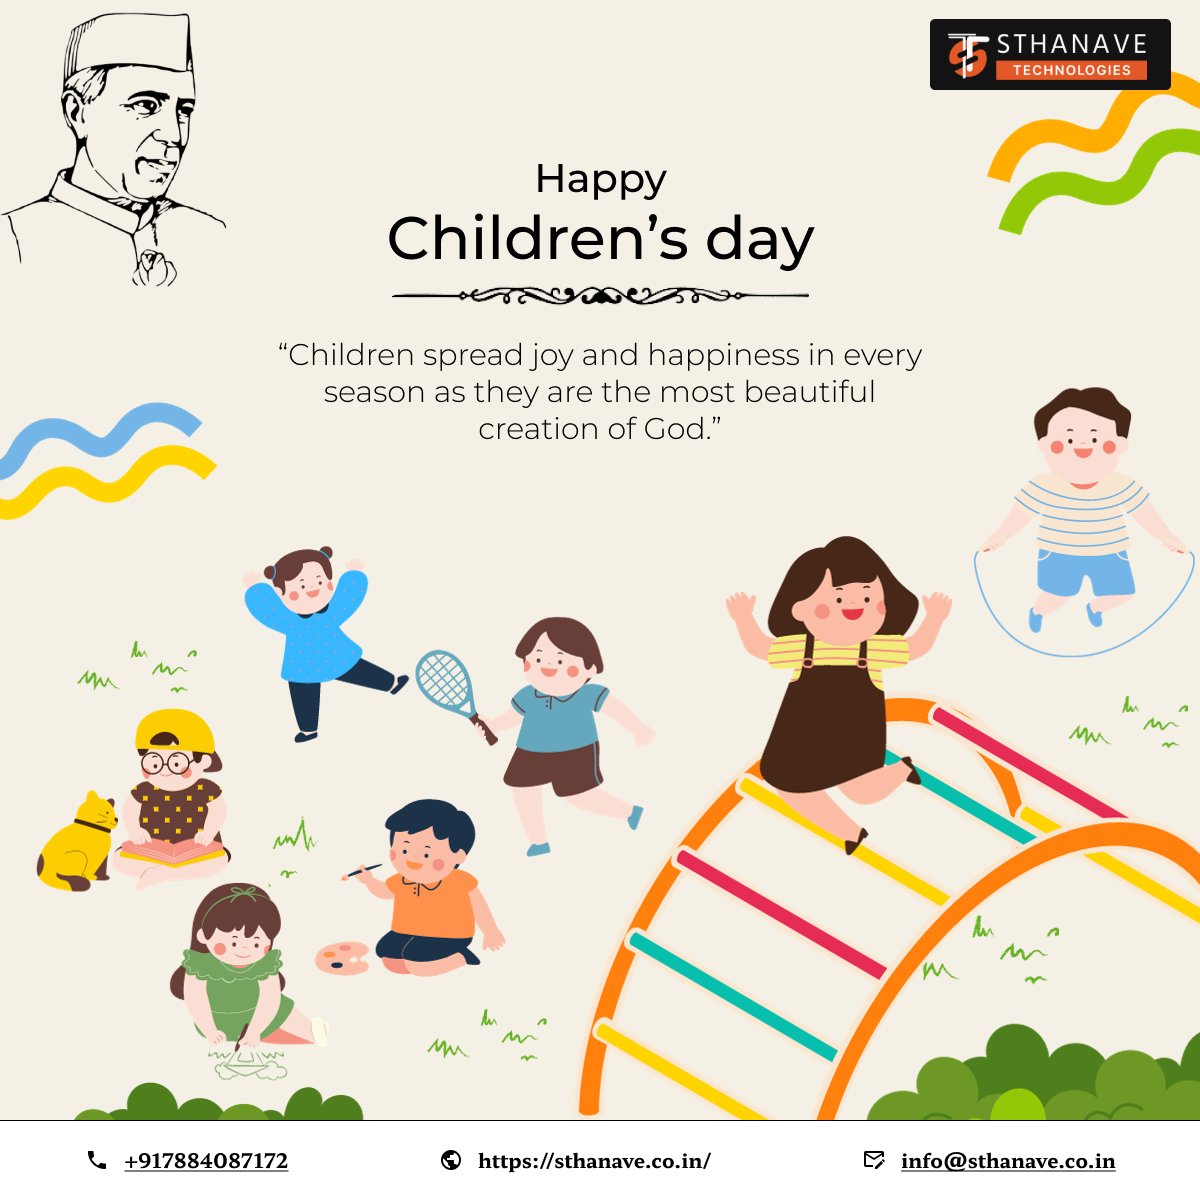 'In the garden of life, children are the most beautiful blossoms. Happy Children's Day to these little blooms that make our world brighter.'💐💐🙋🧑‍
#ChildhoodMagic #LittleDreamers #KidsJoy #LittleStars #Kidspirations